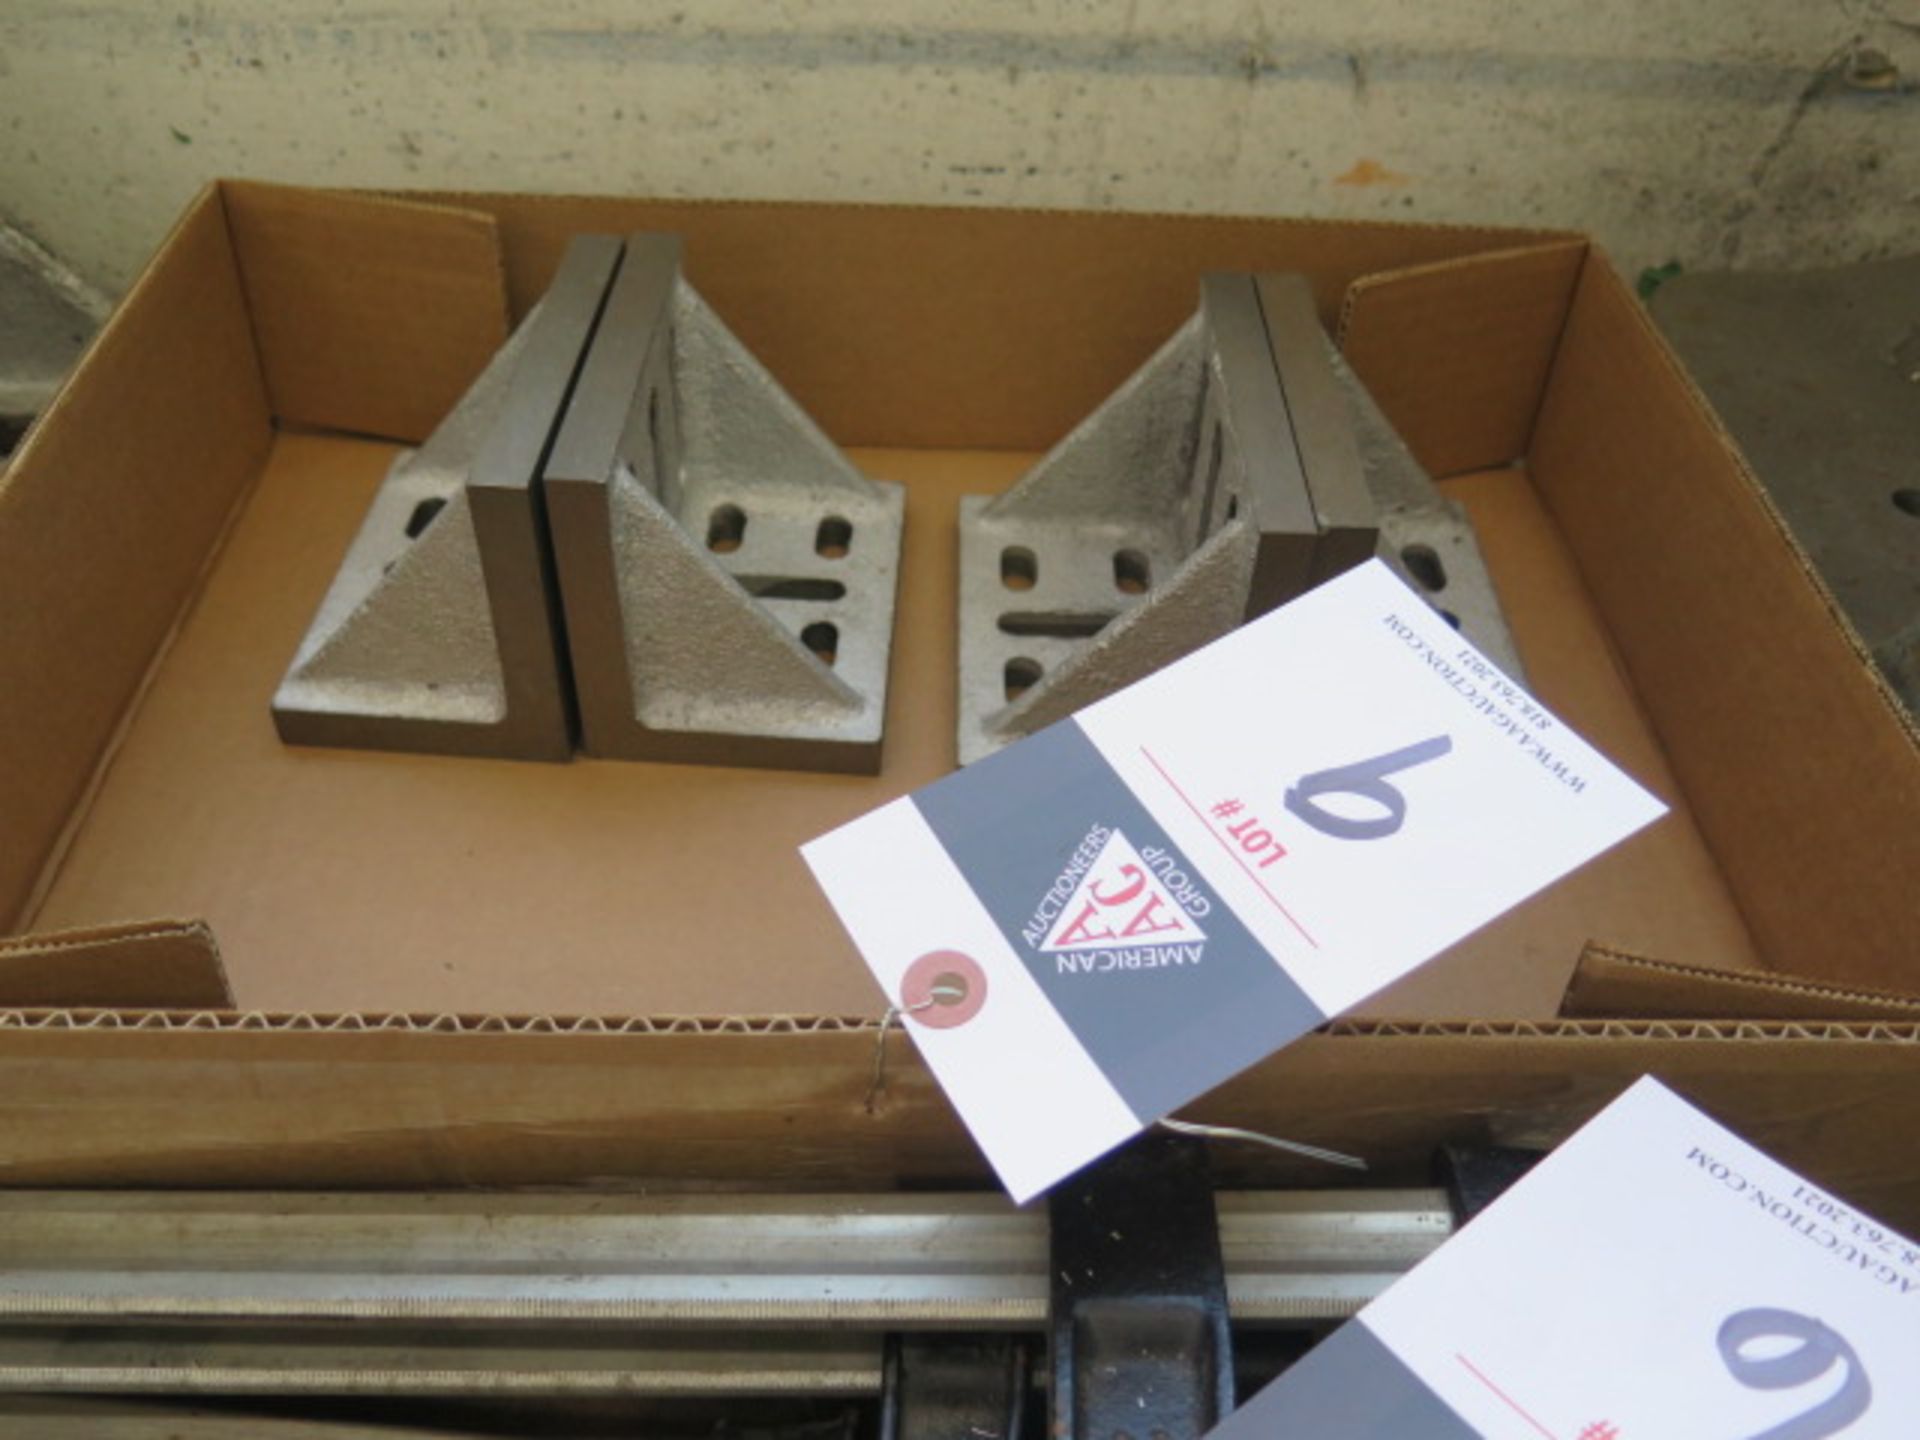 3” x 4 ½” x 3 1/2" Angle Plates (4) (SOLD AS-IS - NO WARRANTY)